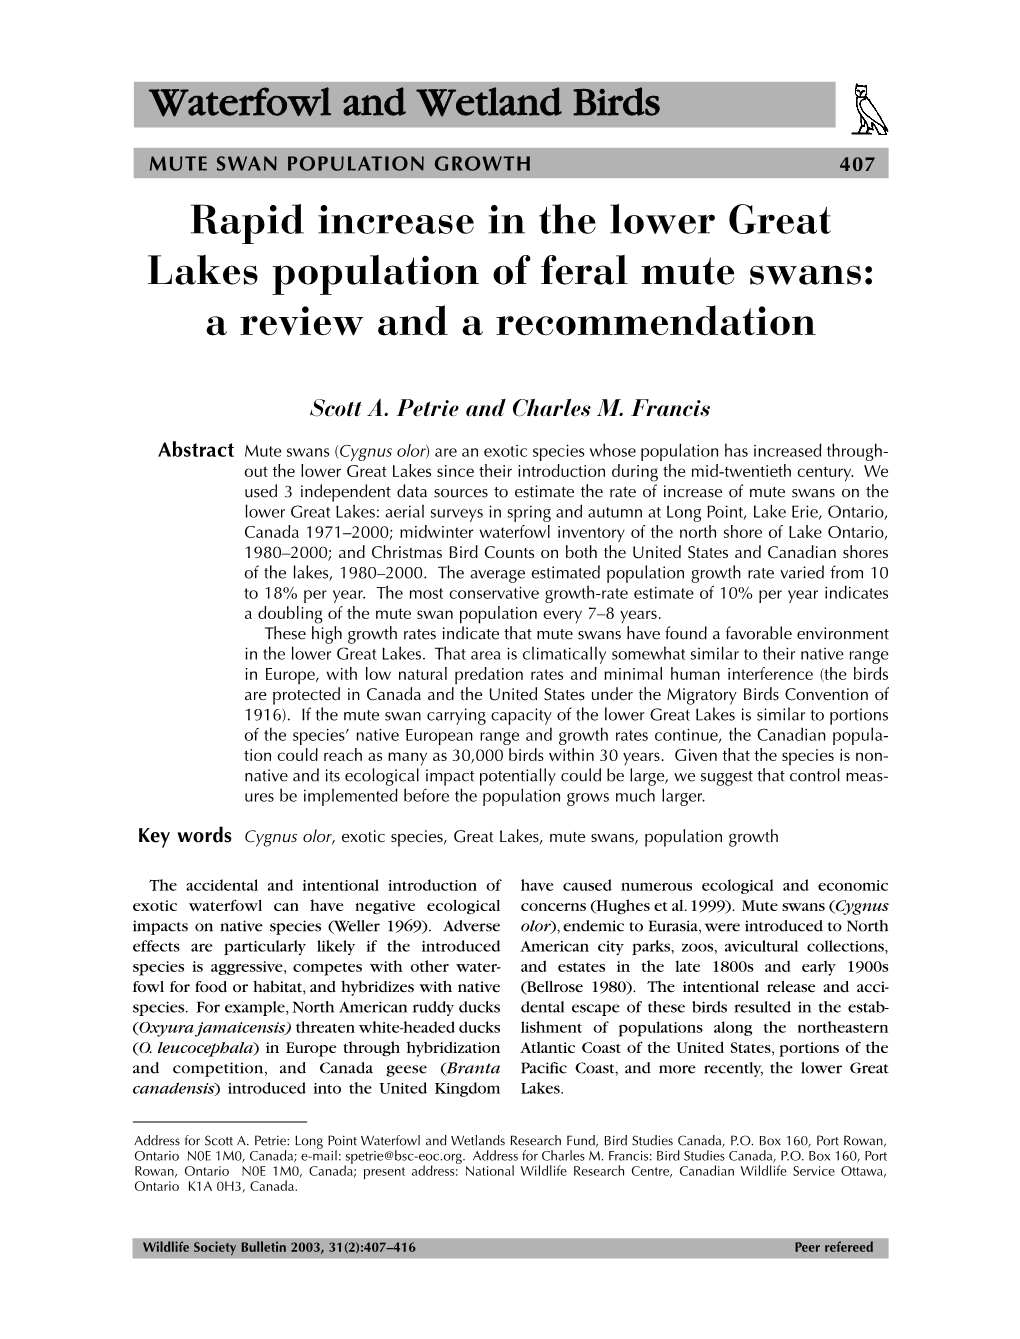 Waterfowl and Wetland Birds Rapid Increase in the Lower Great Lakes Population of Feral Mute Swans: a Review and a Recommendatio